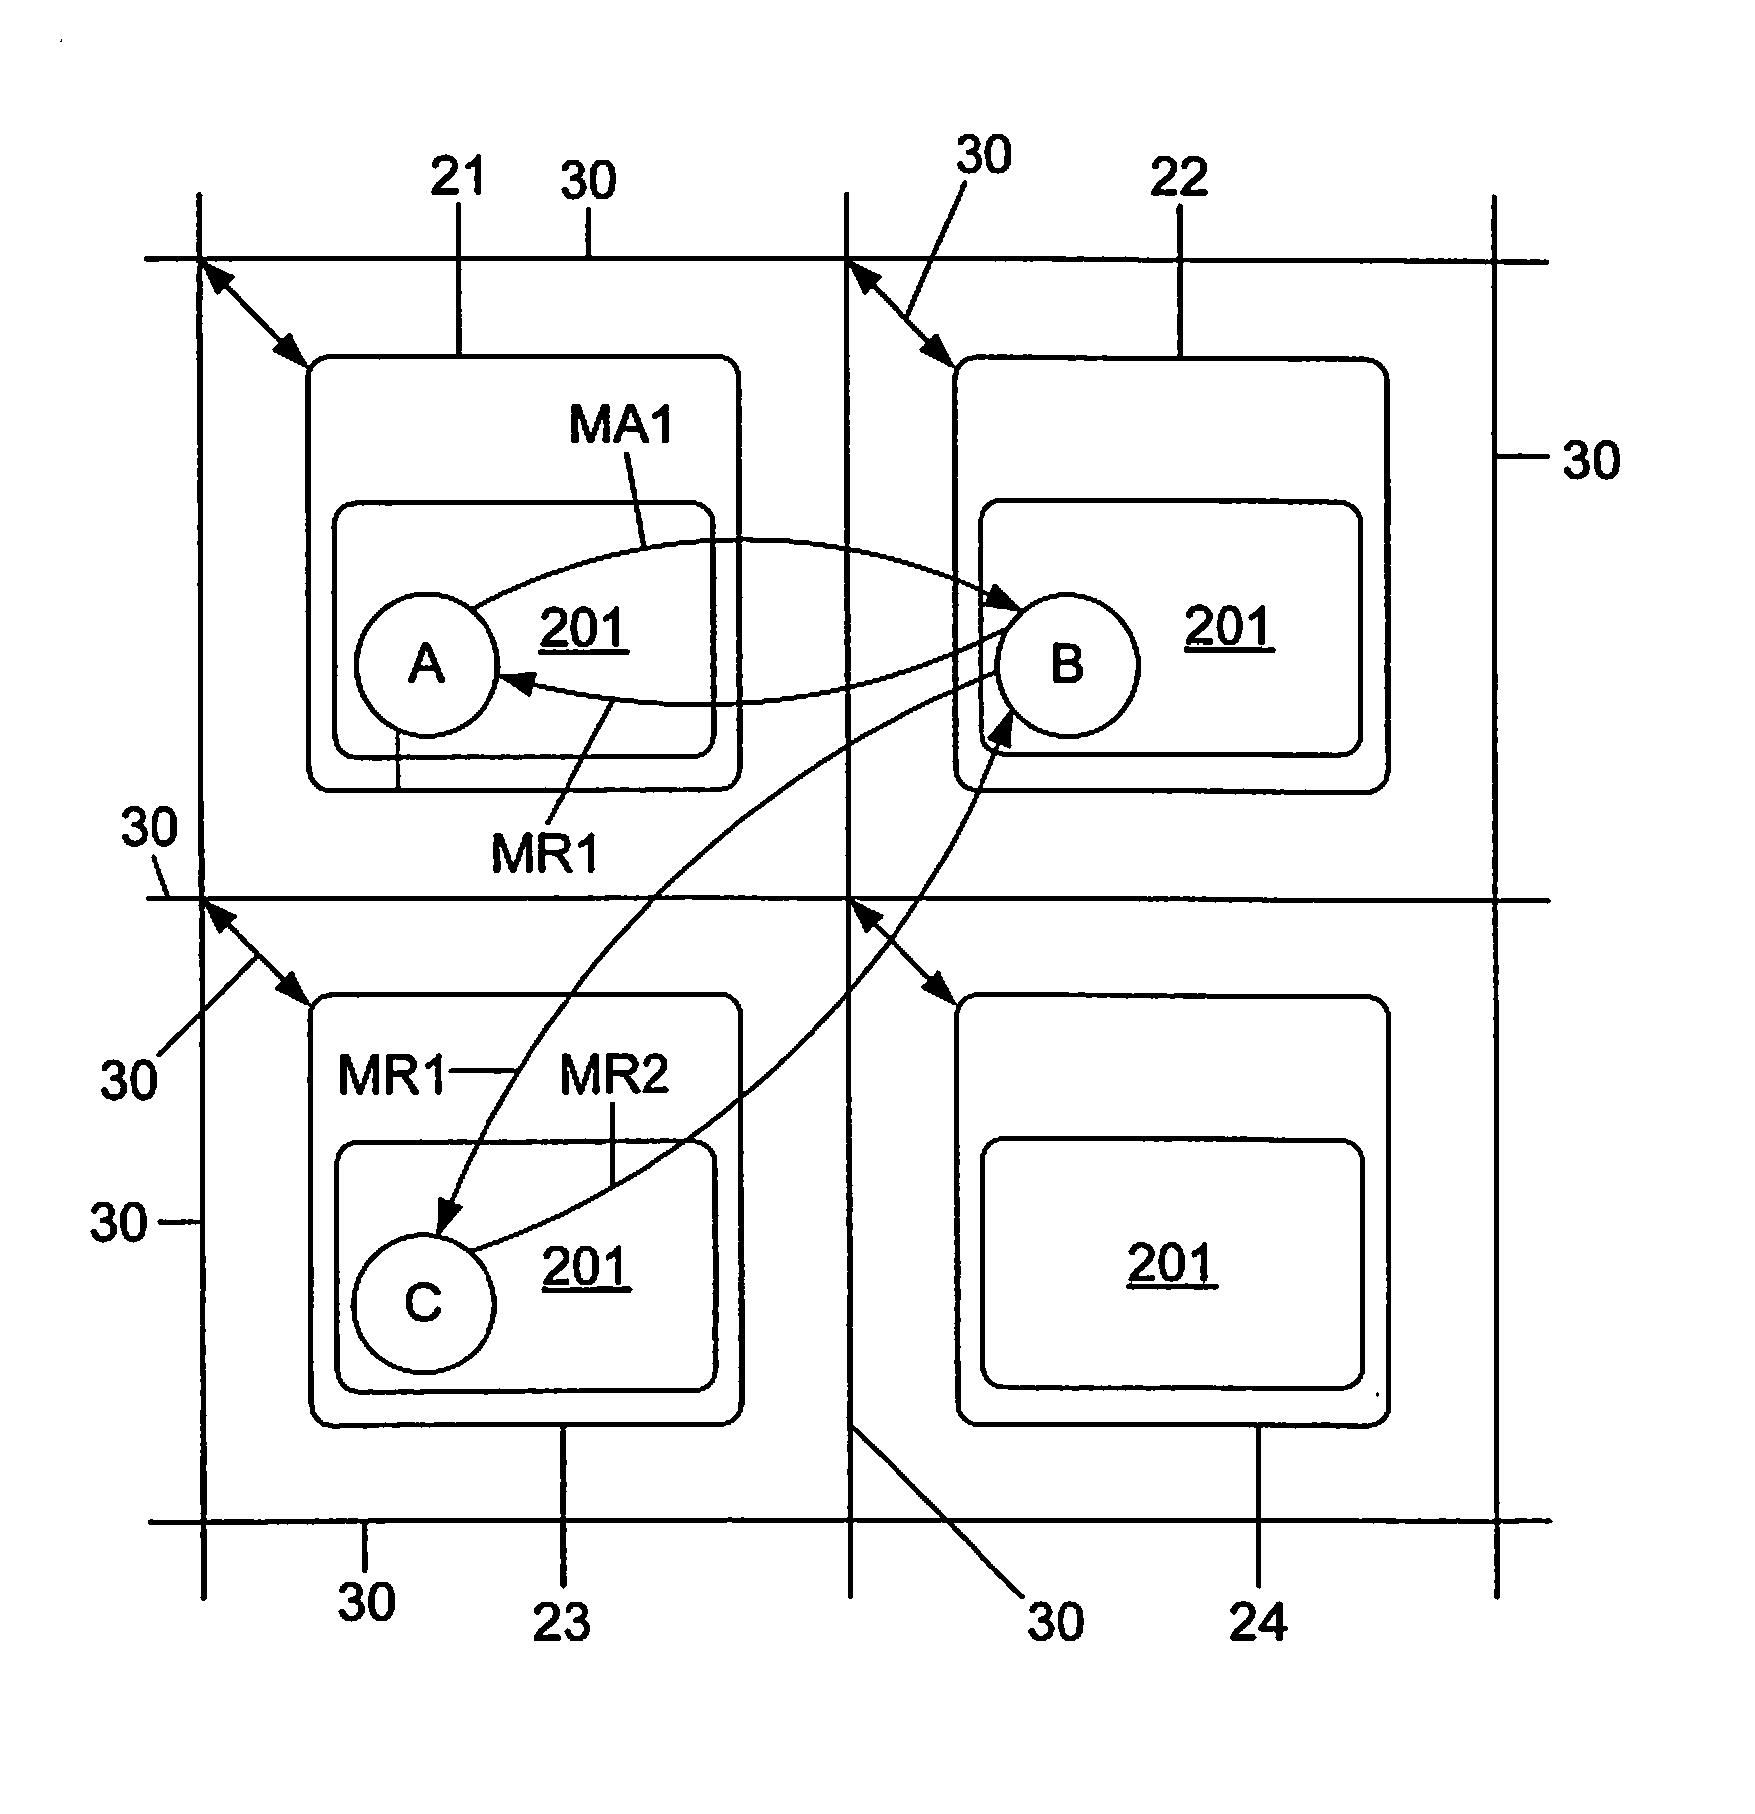 Method for Executing One or More Programs on a Multi-Core Processor and Many-Core Processor